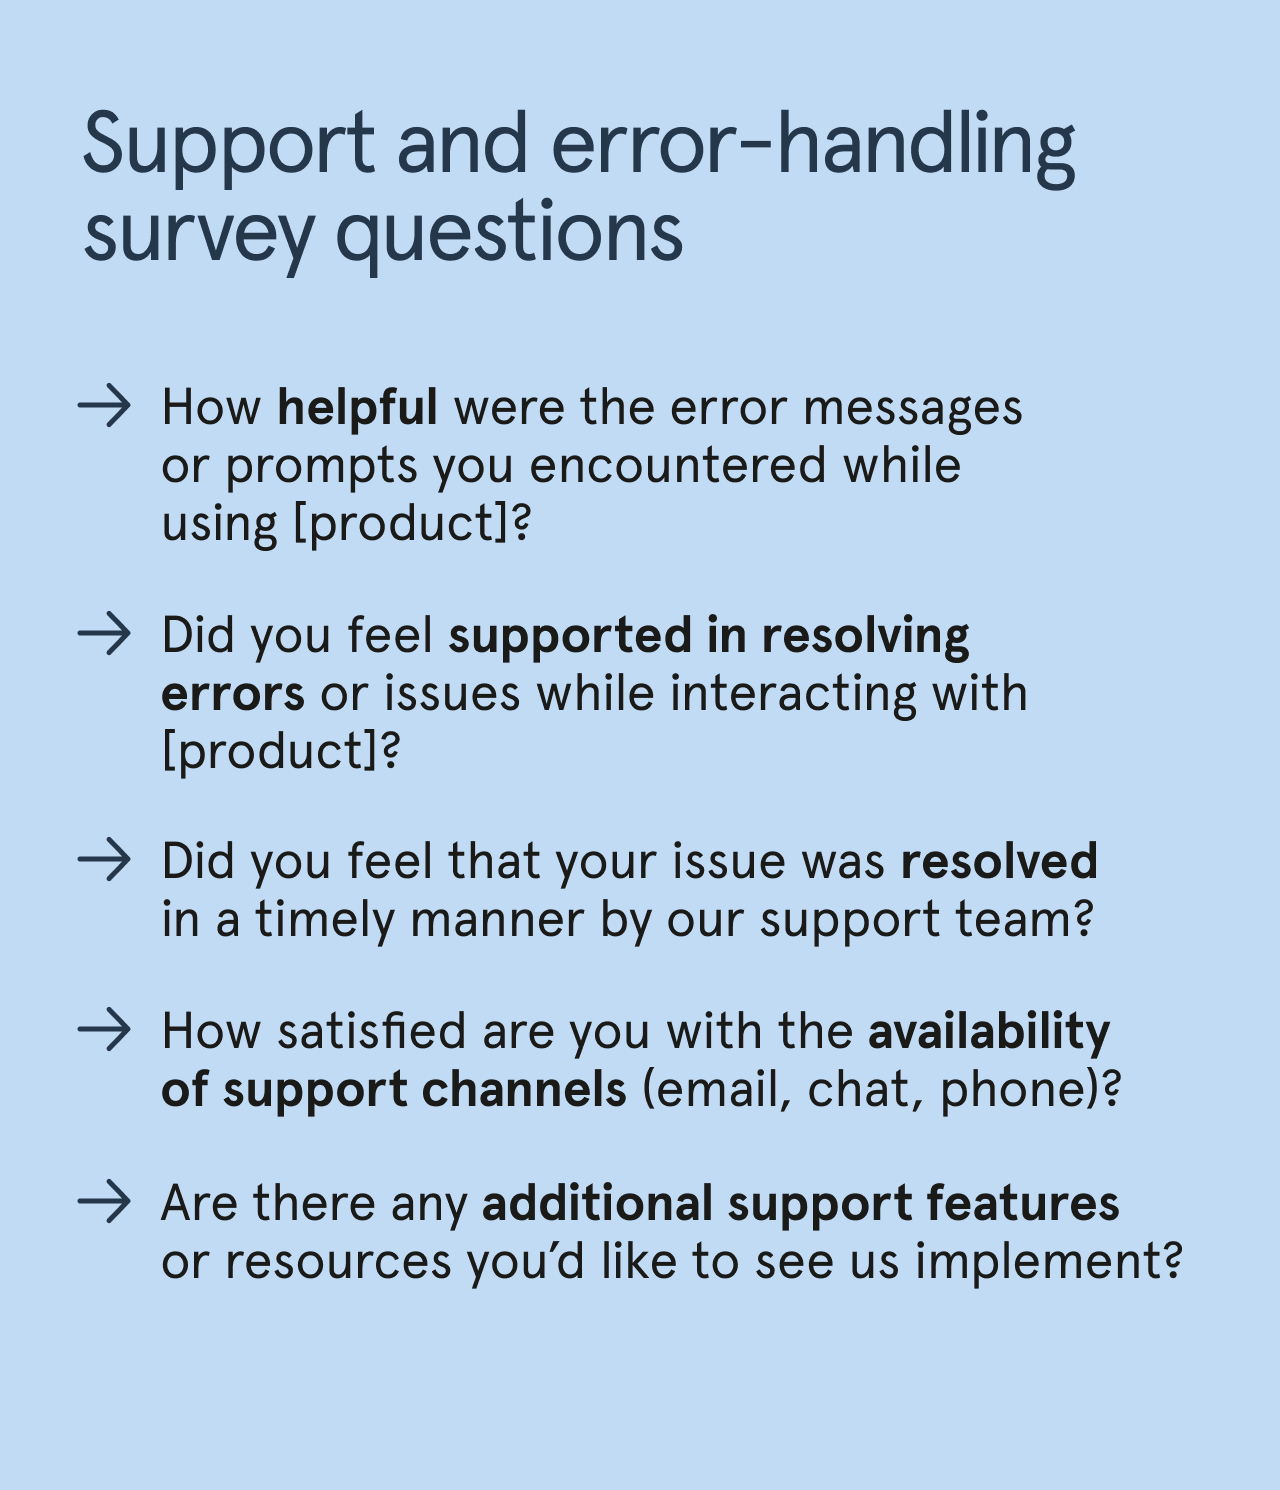 List of support and error-handling user experience survey questions.